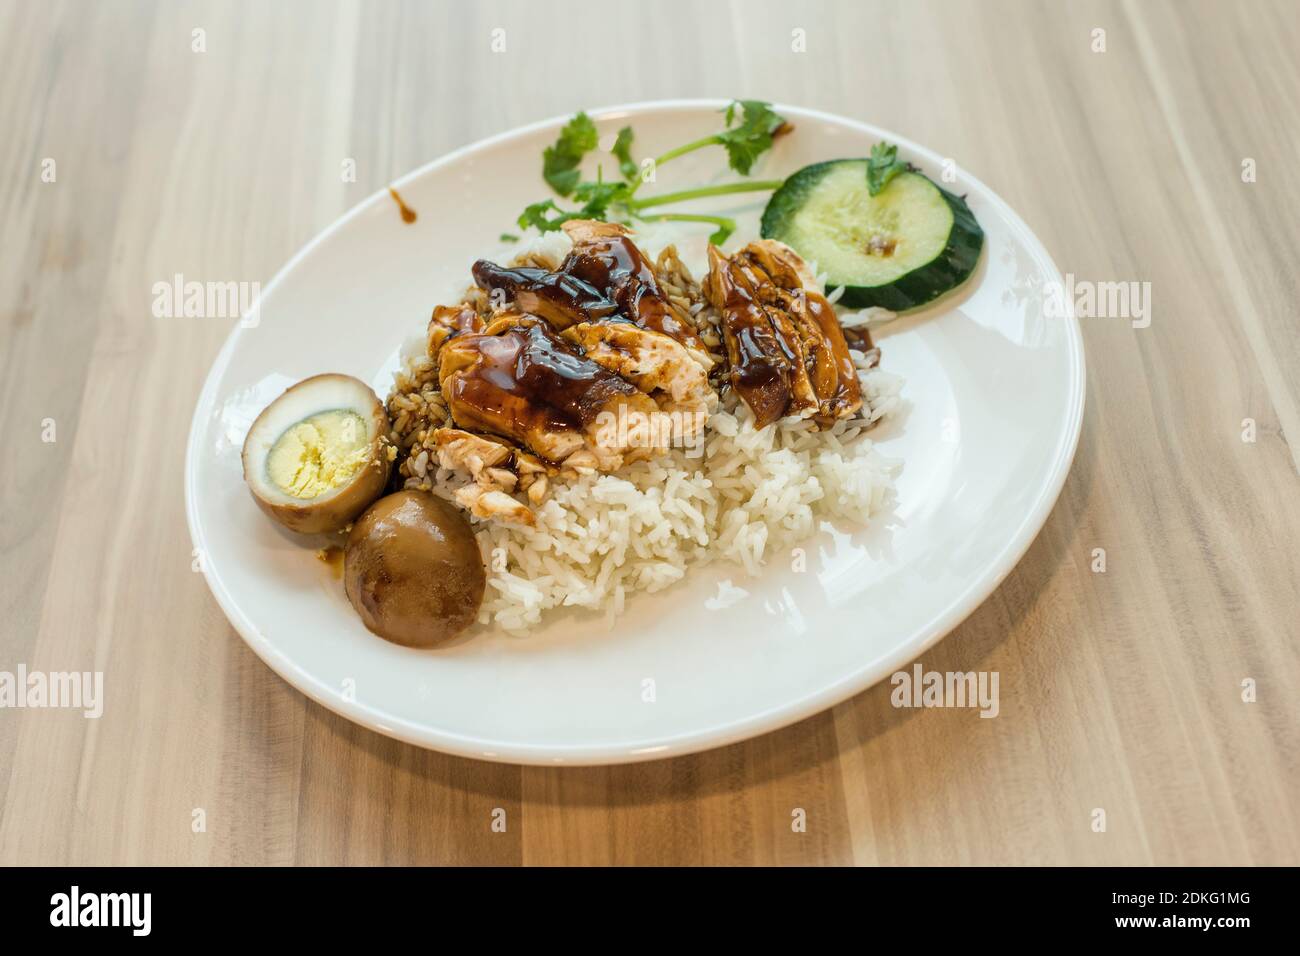 High Angle View Of Meal Served On Table Stock Photo